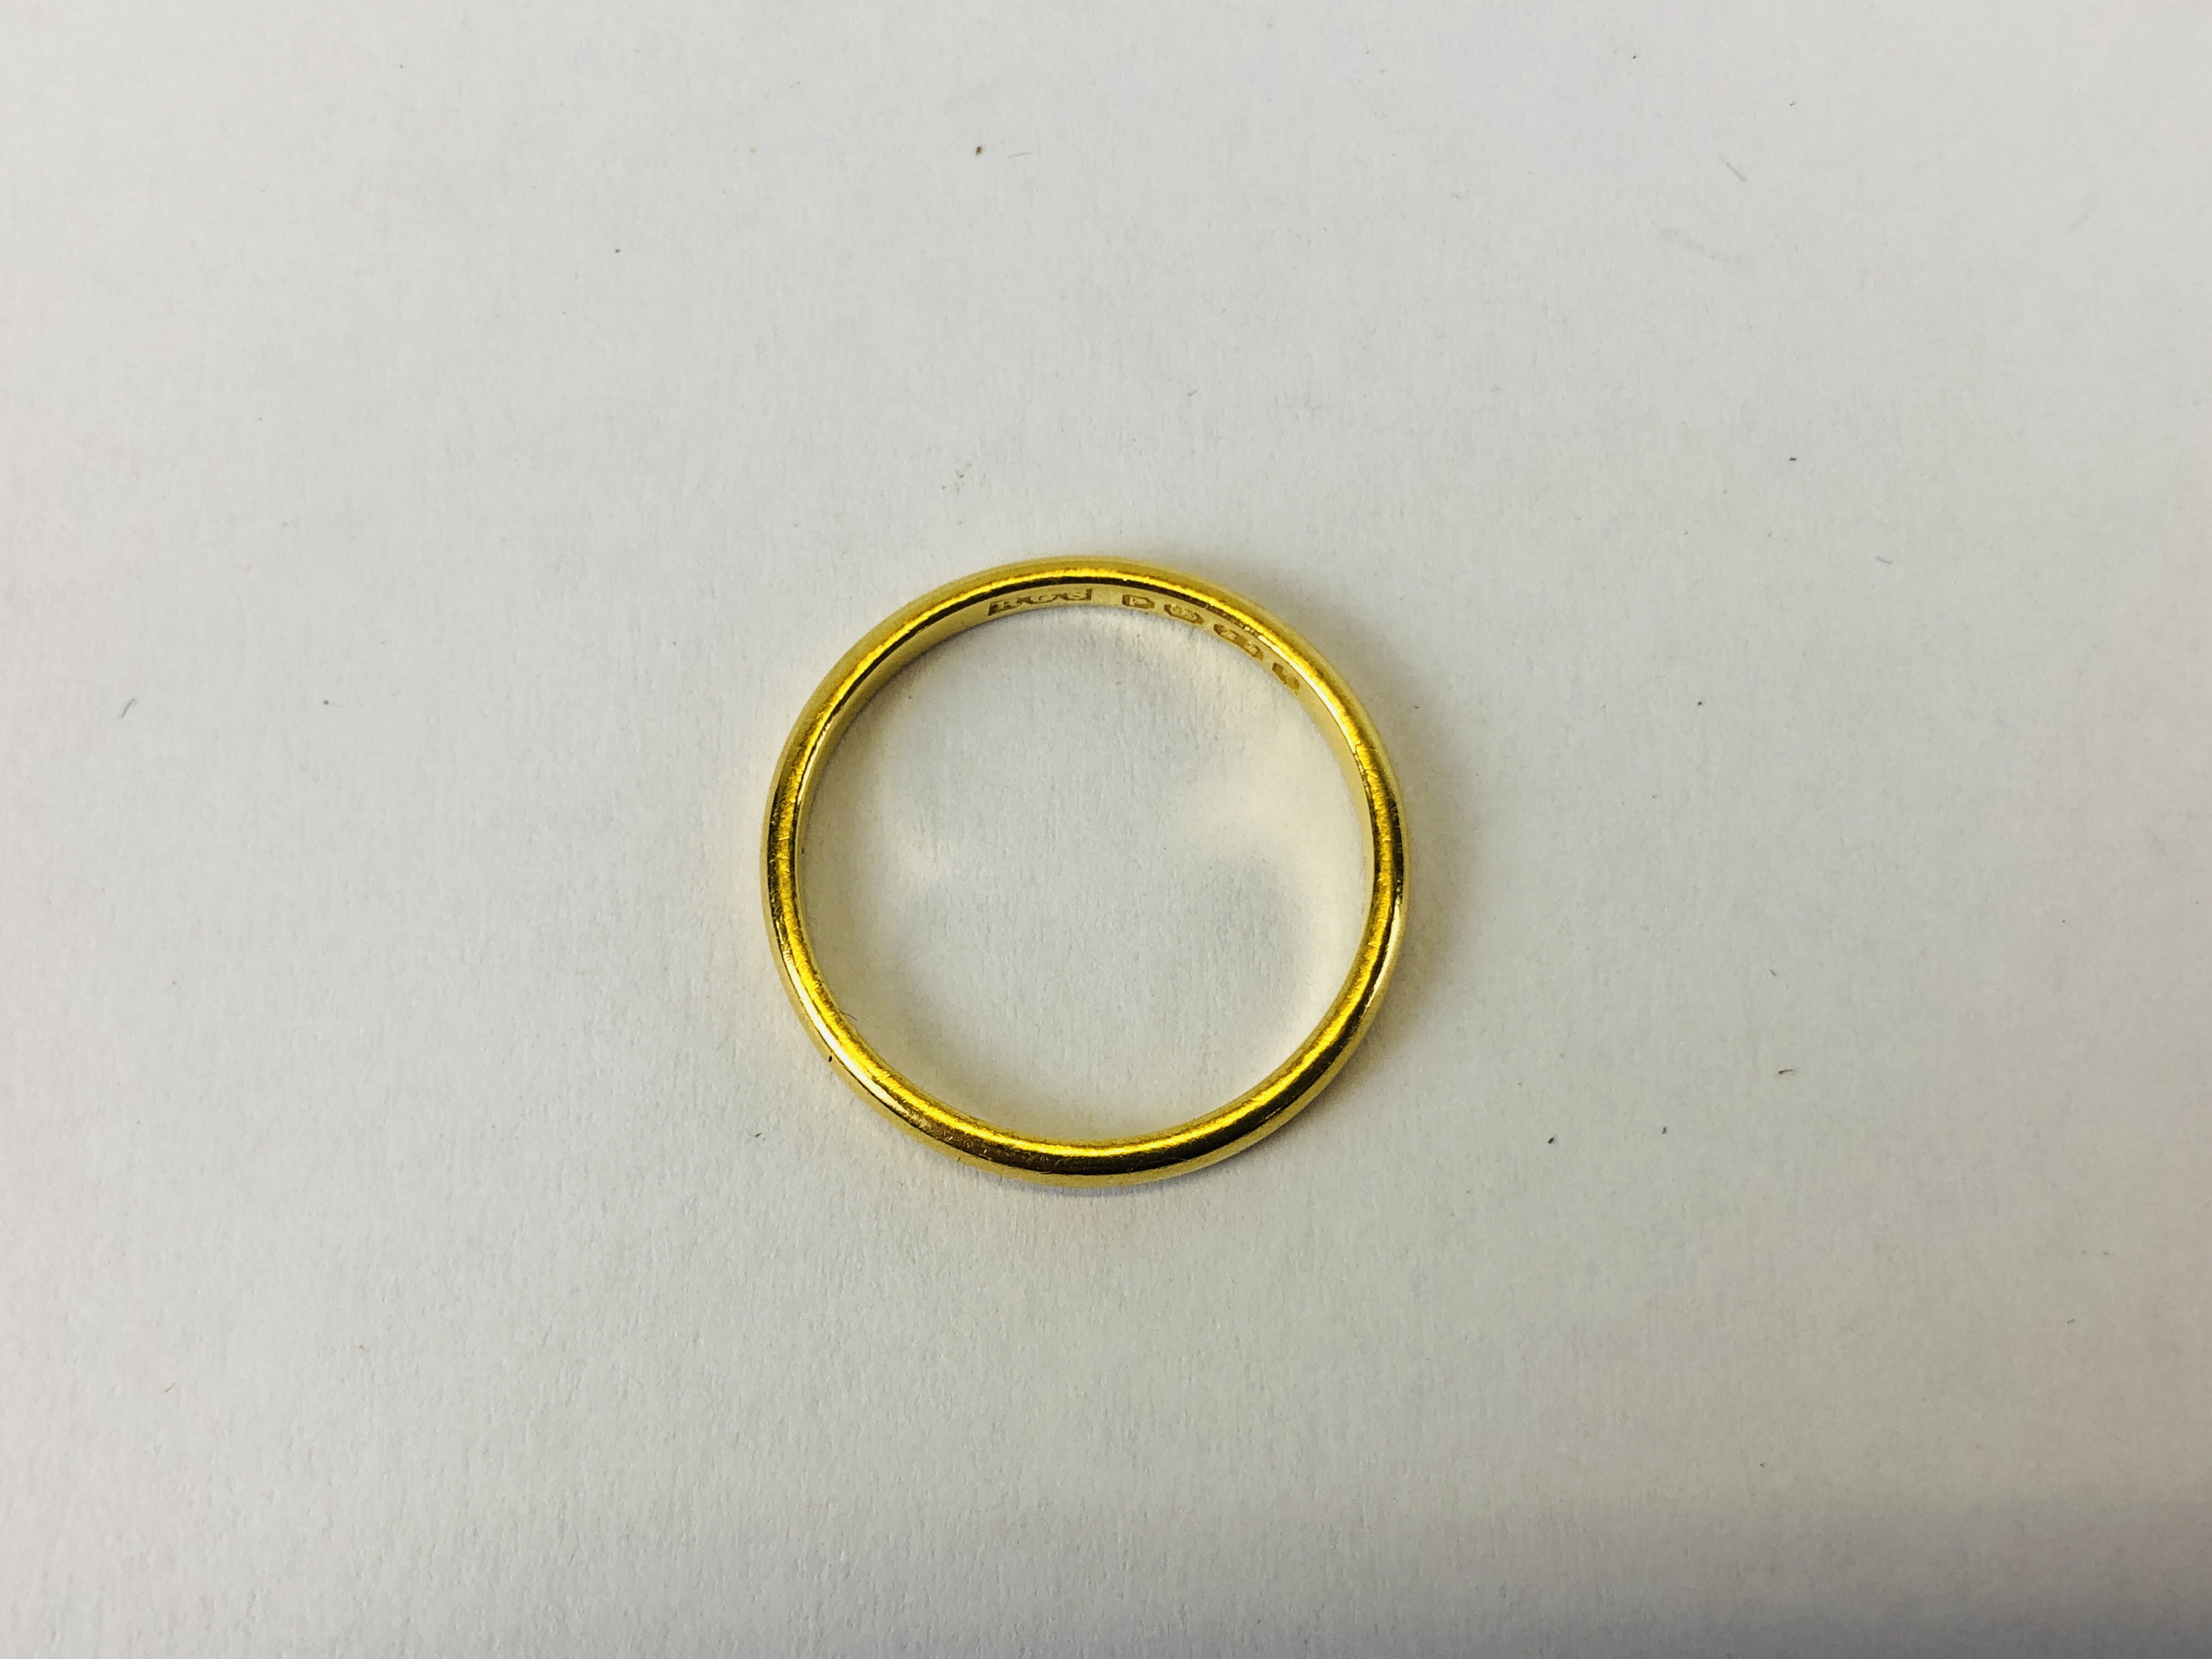 A 22CT GOLD WEDDING BAND. - Image 2 of 7